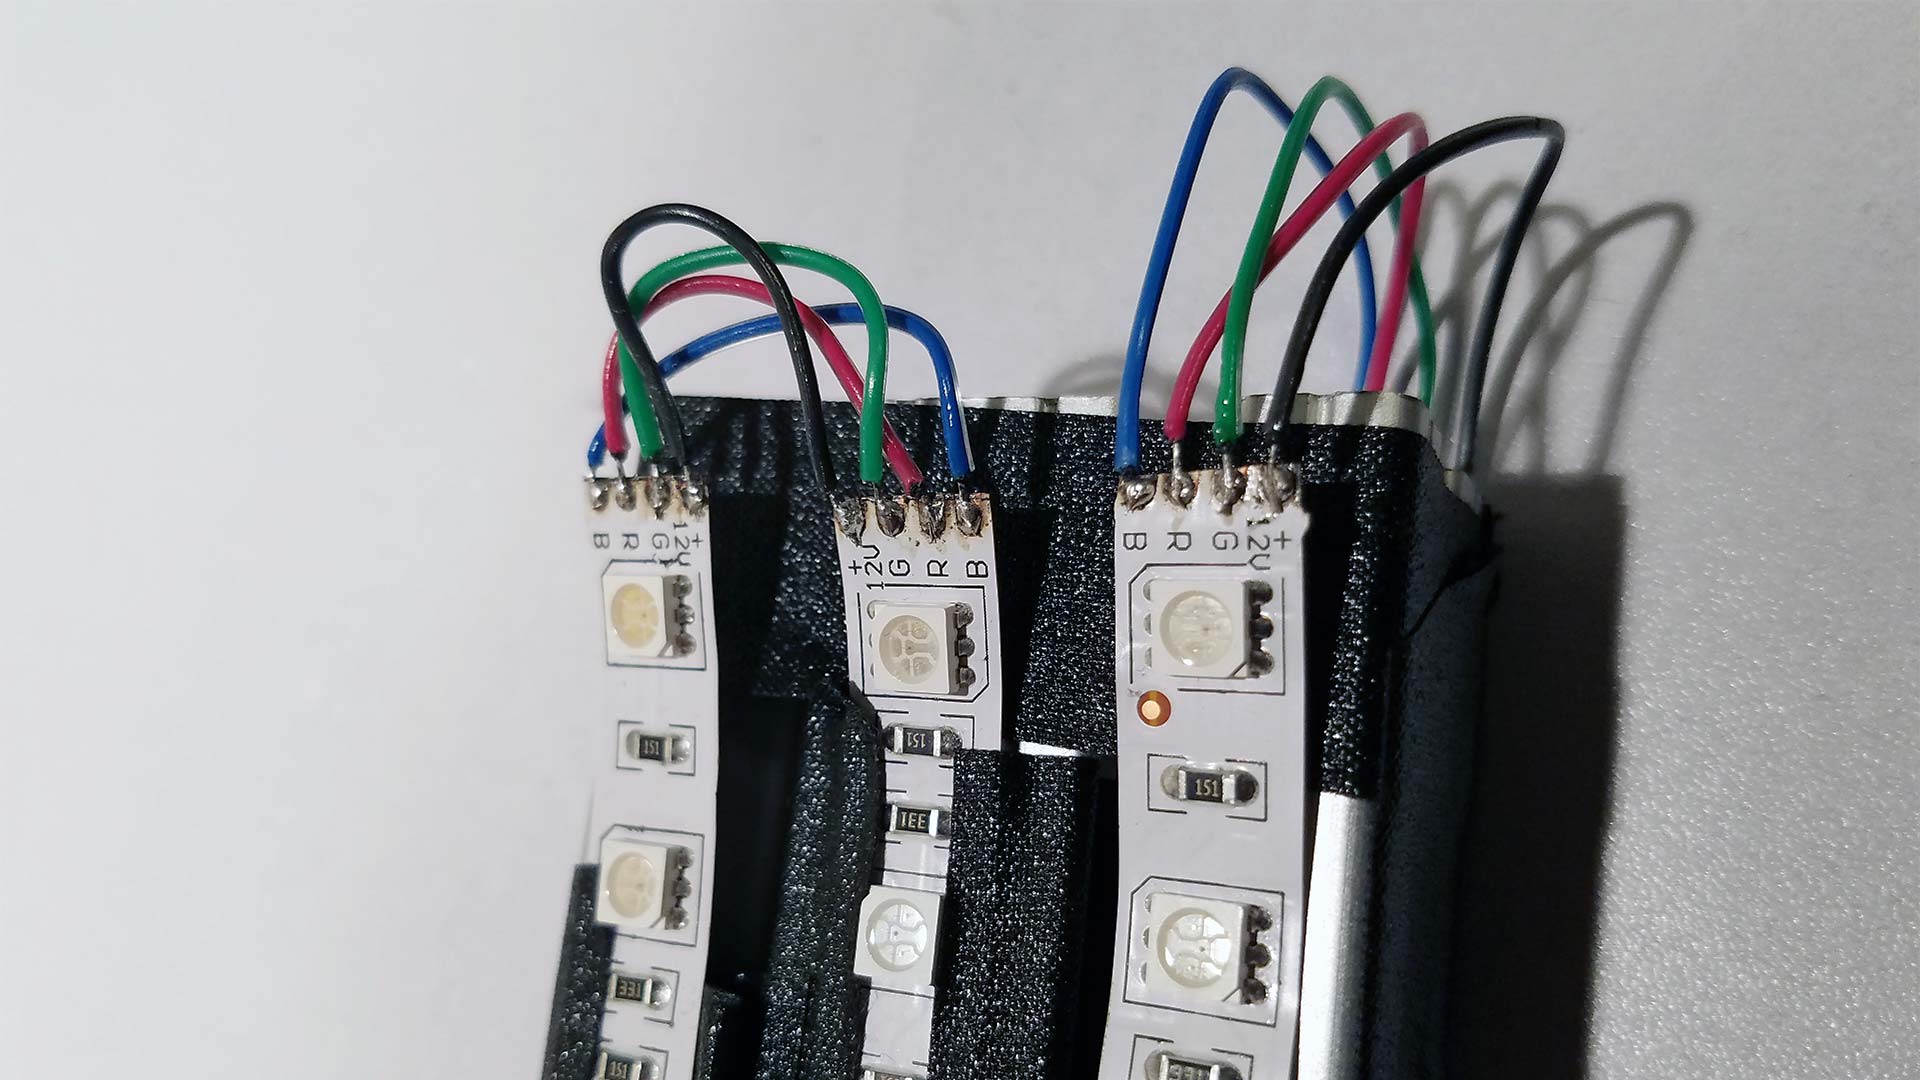 LED Strips - Soldering the power together.